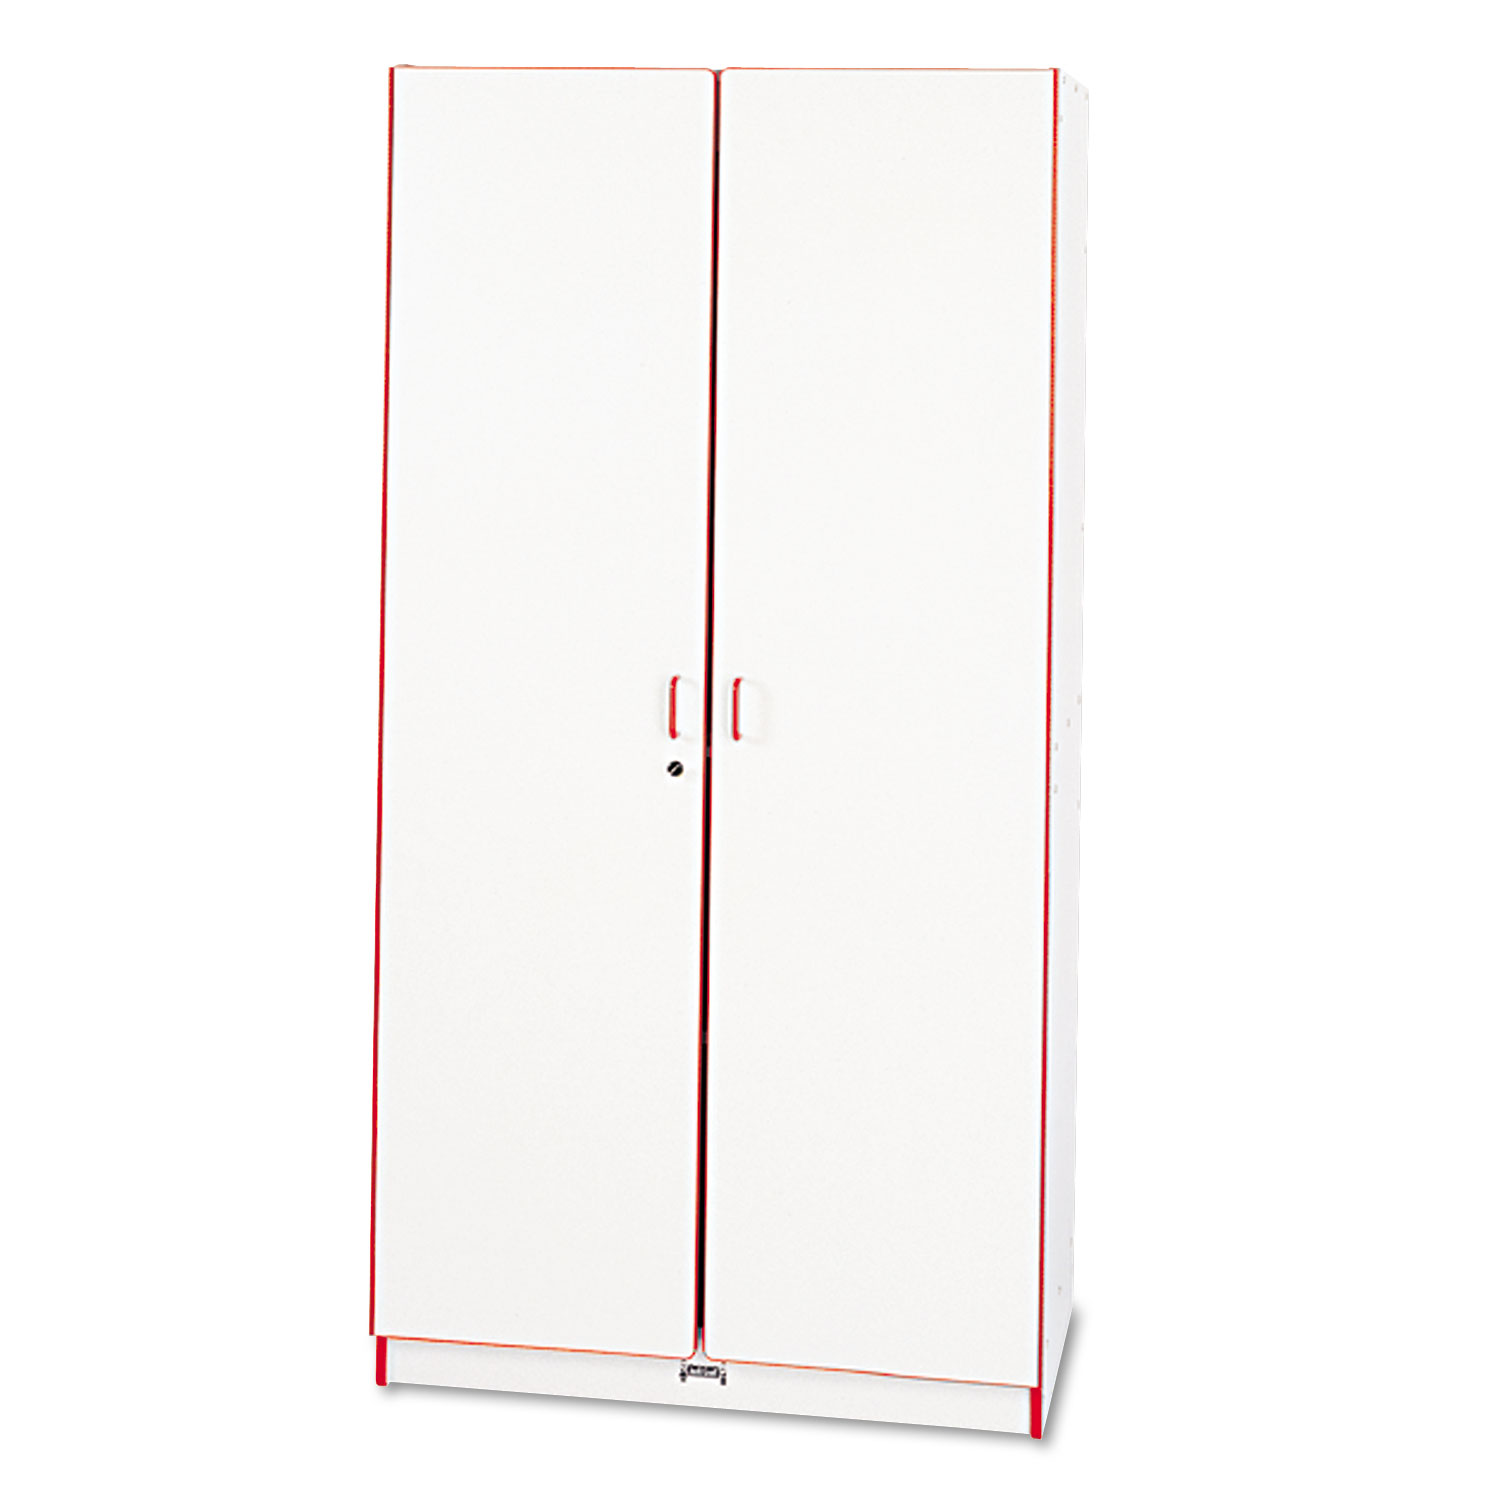 Rainbow Accents Deluxe Classroom Closet, 36w x 24d x 72h, Red/Gray